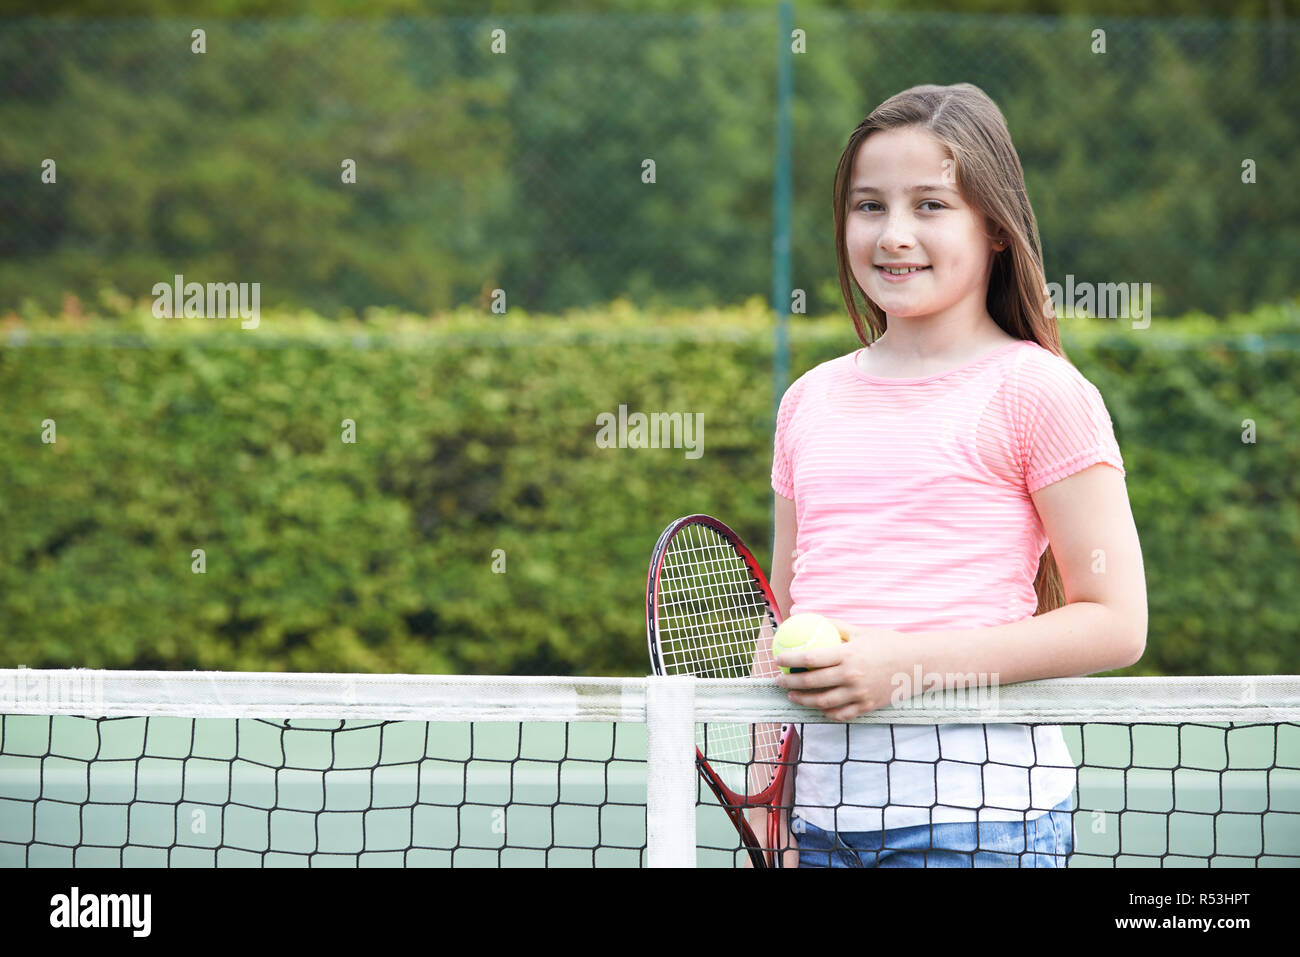 Portrait Of Young Girl Playing Tennis Stock Photo